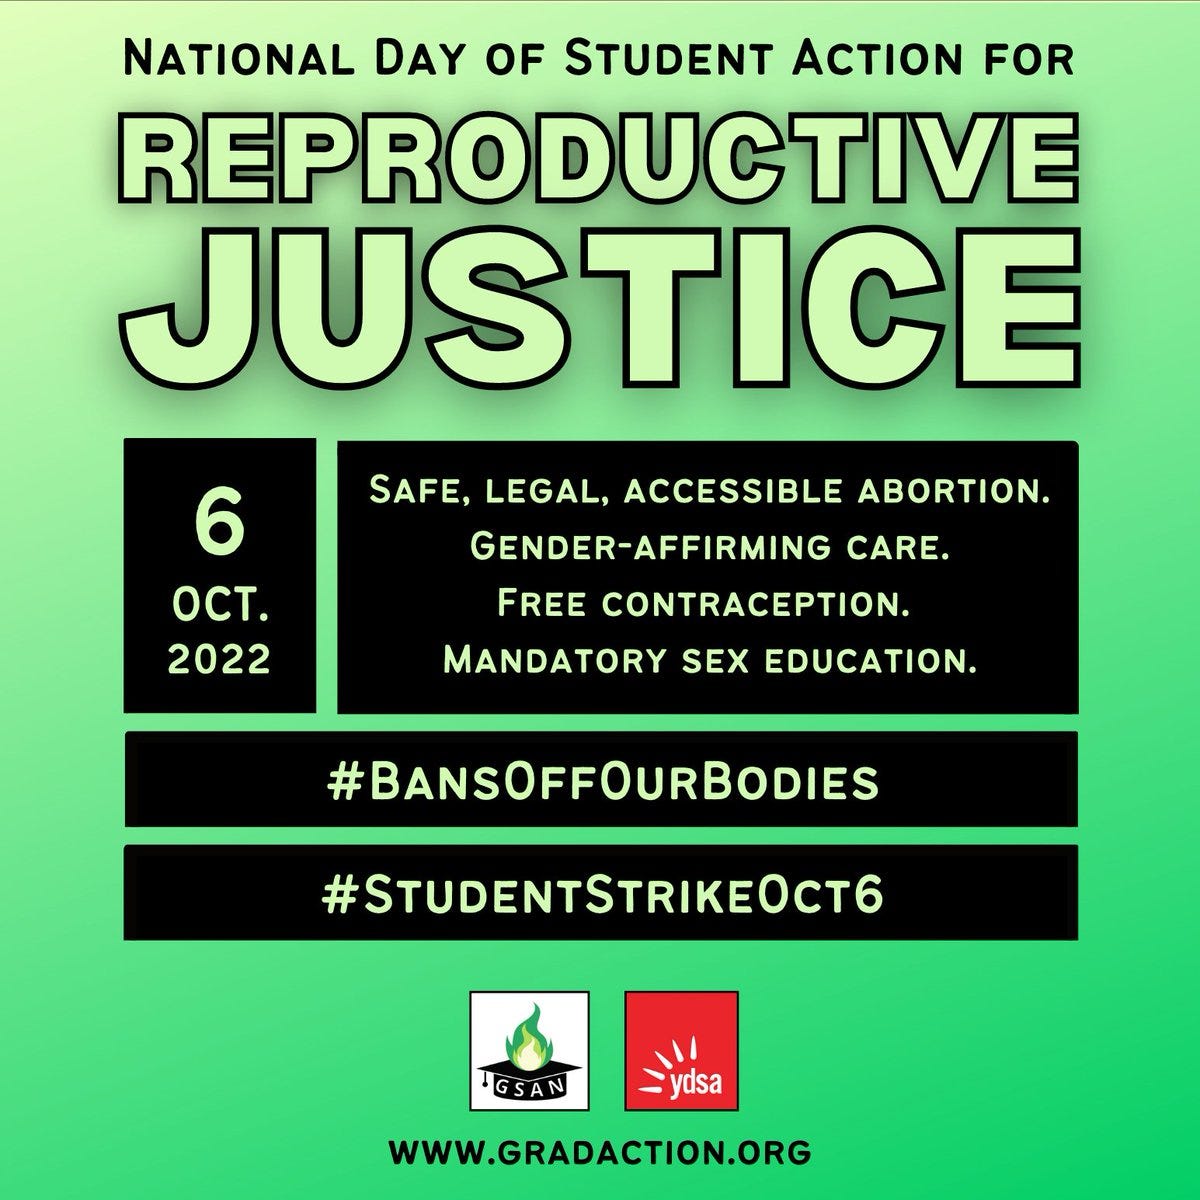 National Day of Student Action for Reproductive Justice. Oct 6, 2022. Gender-affirming Care. Free Contraception. Mandatory Sex Education. #BansOffOurBodies #StudentStrikeOct6